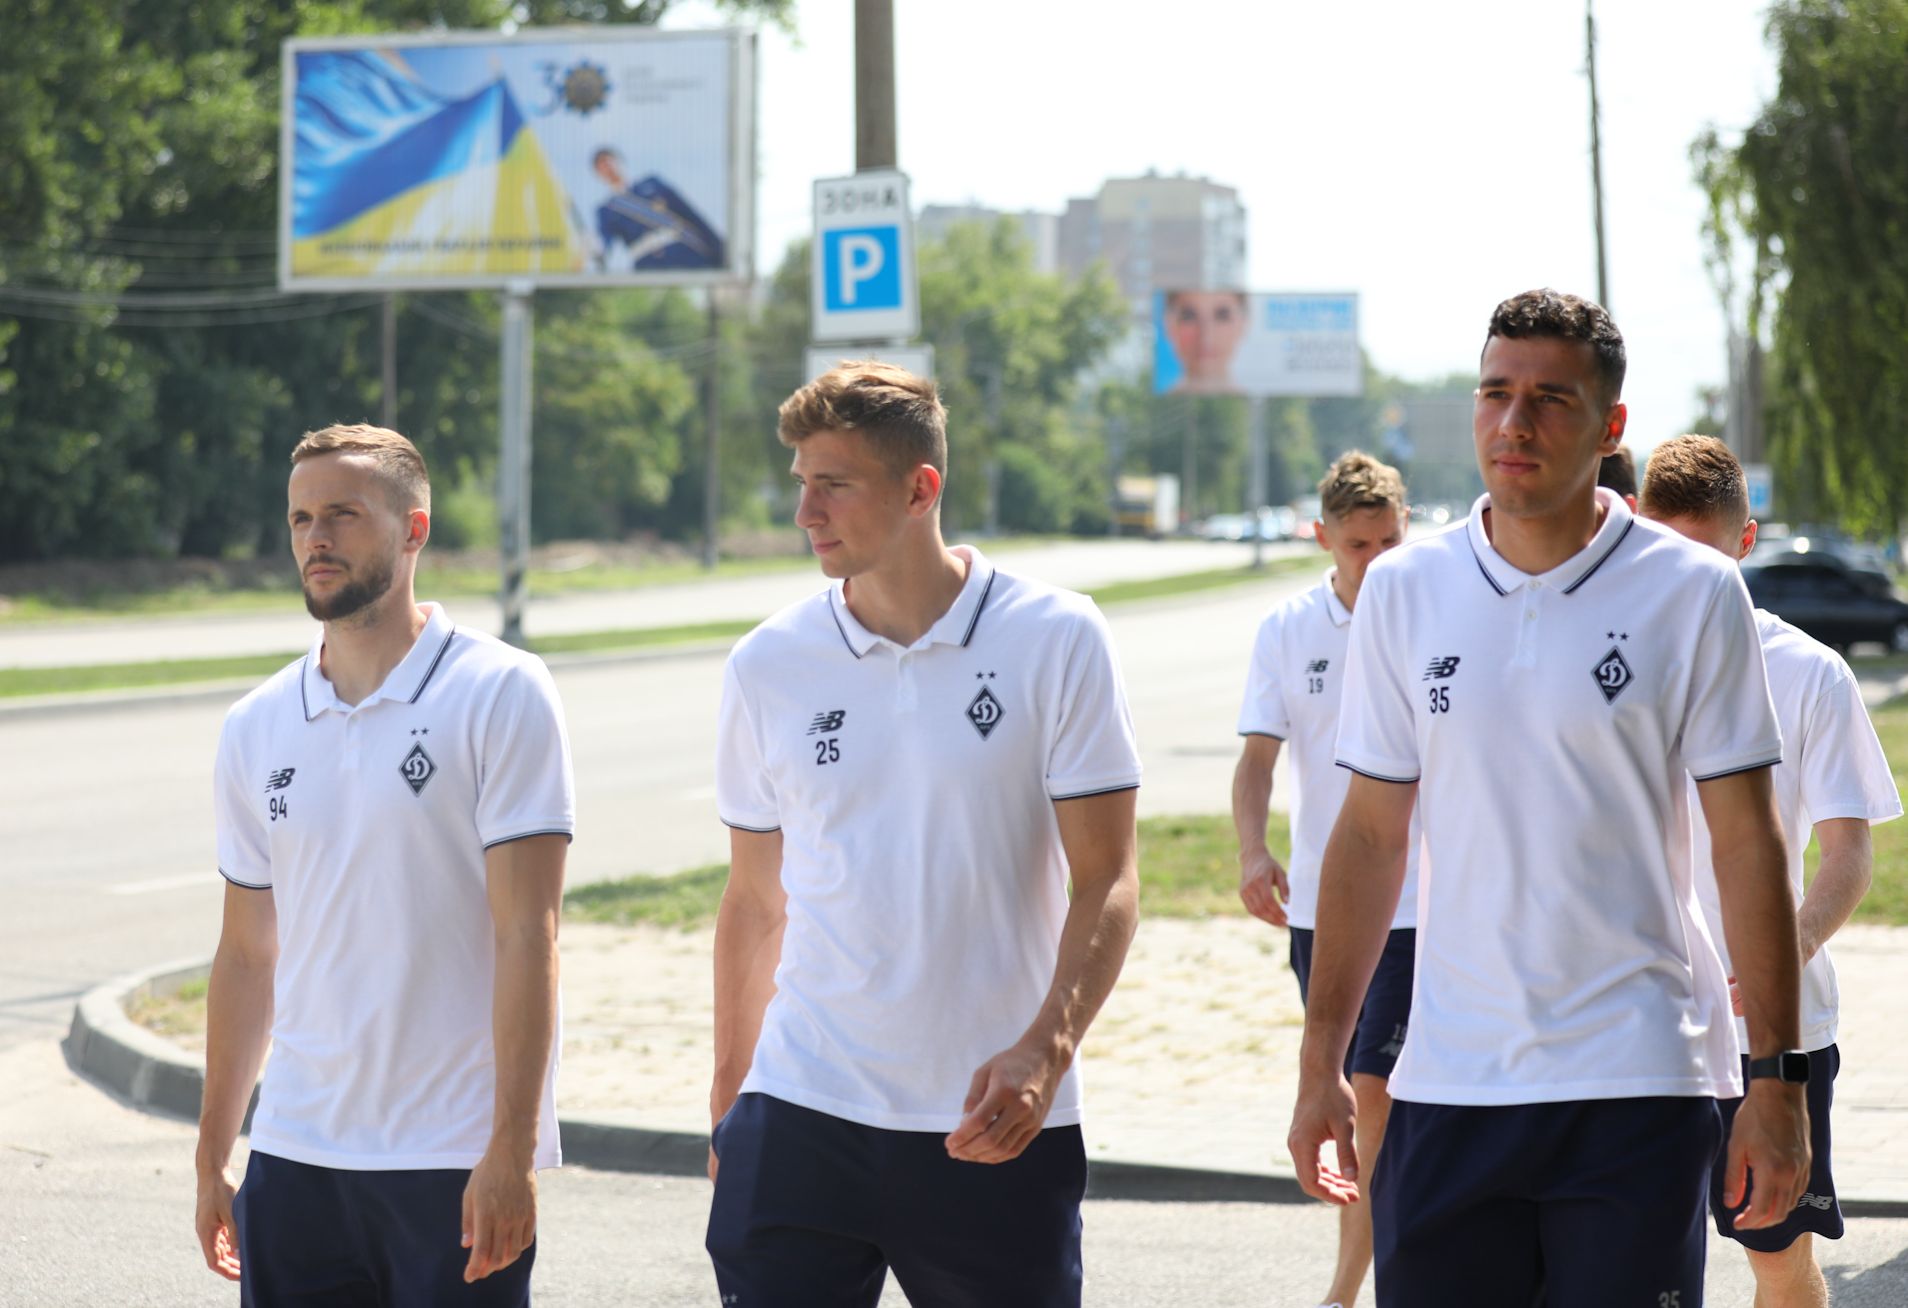 Traditional stroll before the match (PHOTOS)